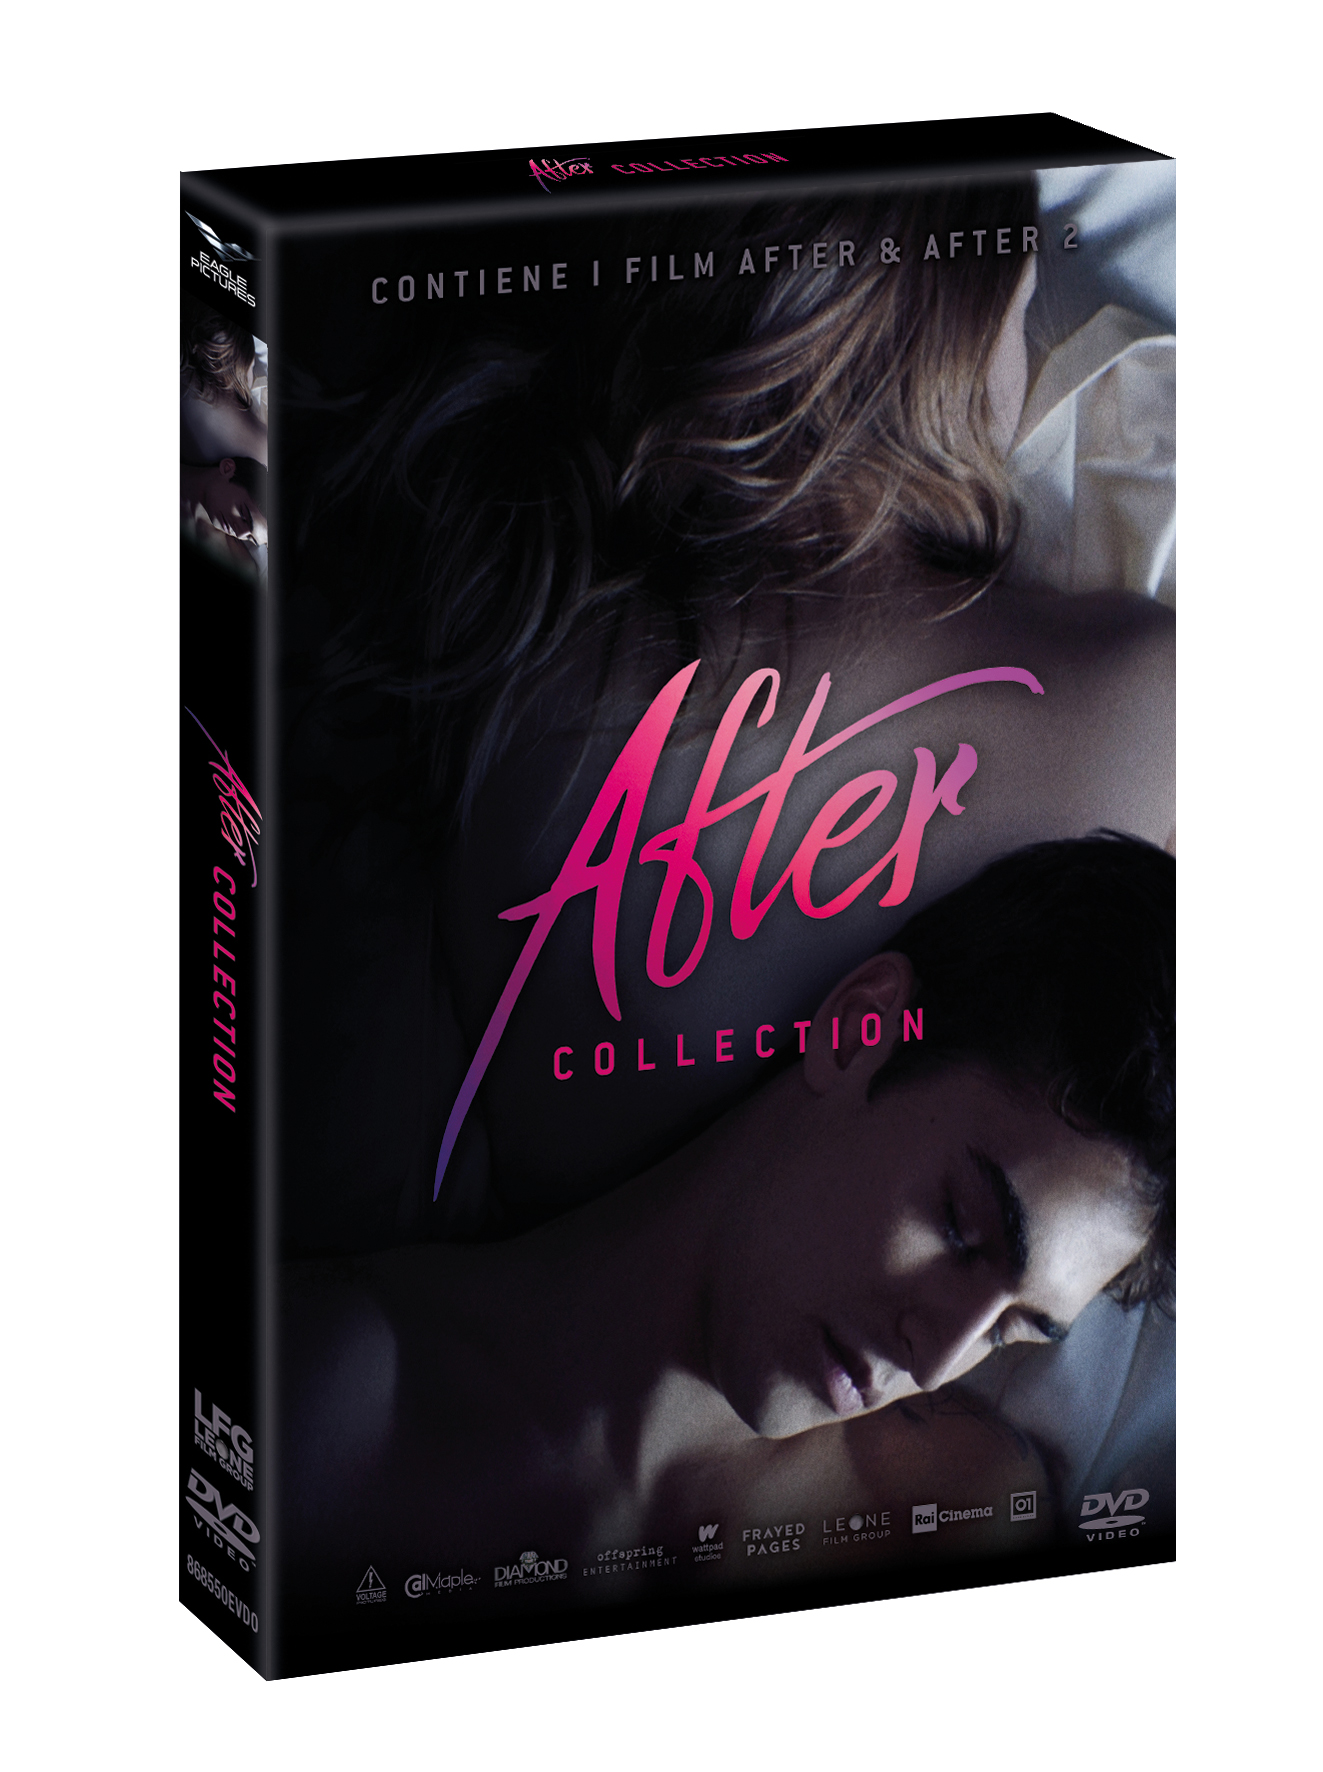 After collection. After we Collided book. Collide книга. After we Collided обложка. Пепел любви книга.